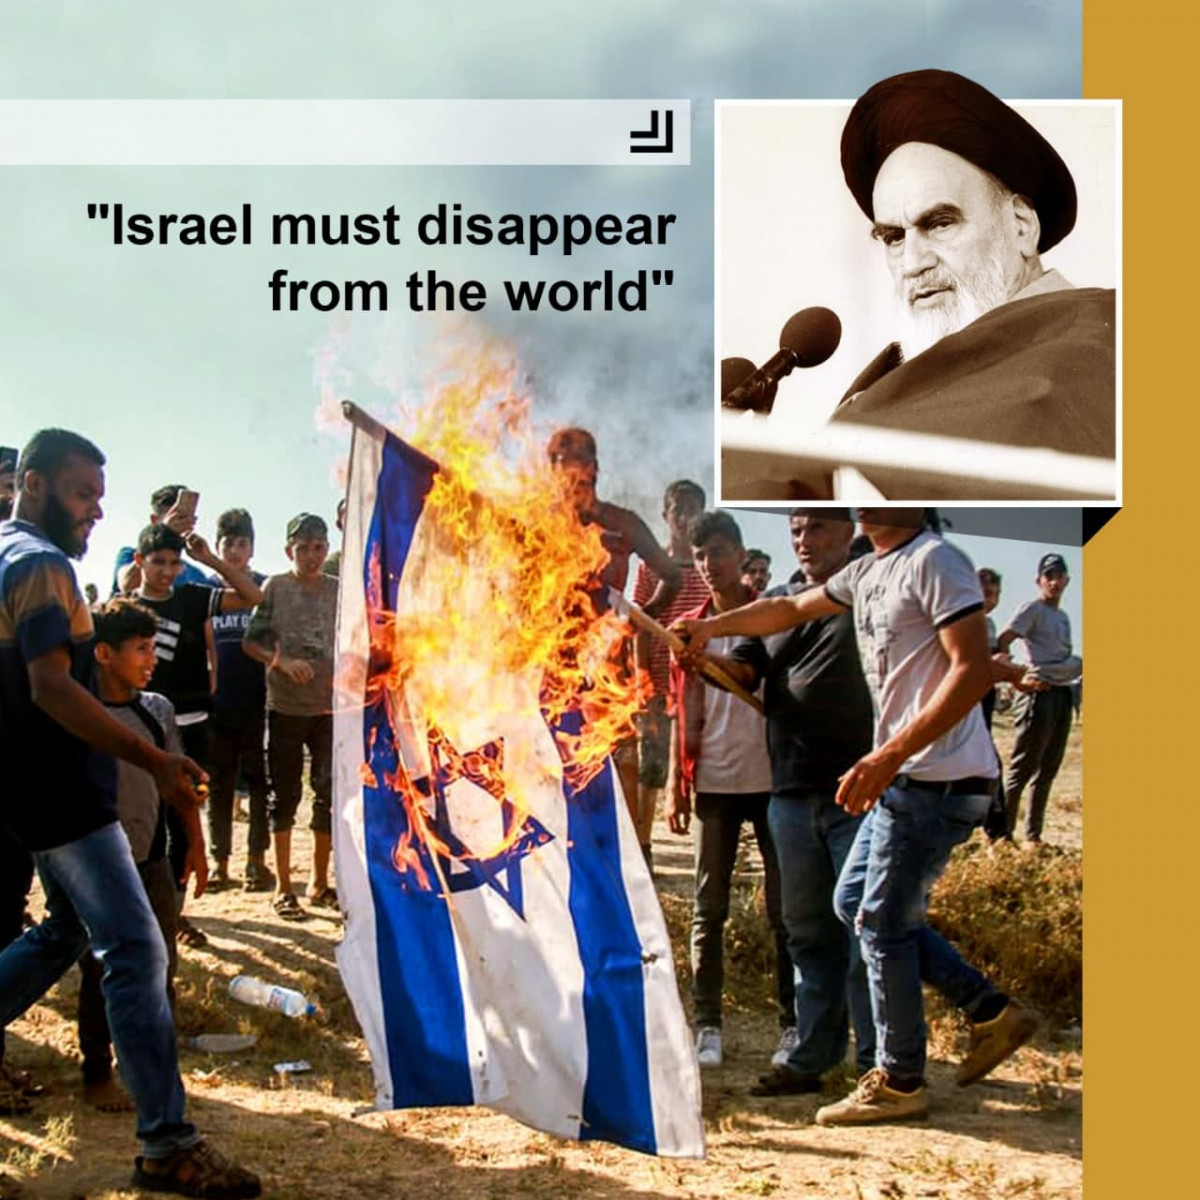 "Israel must disappear from the world"